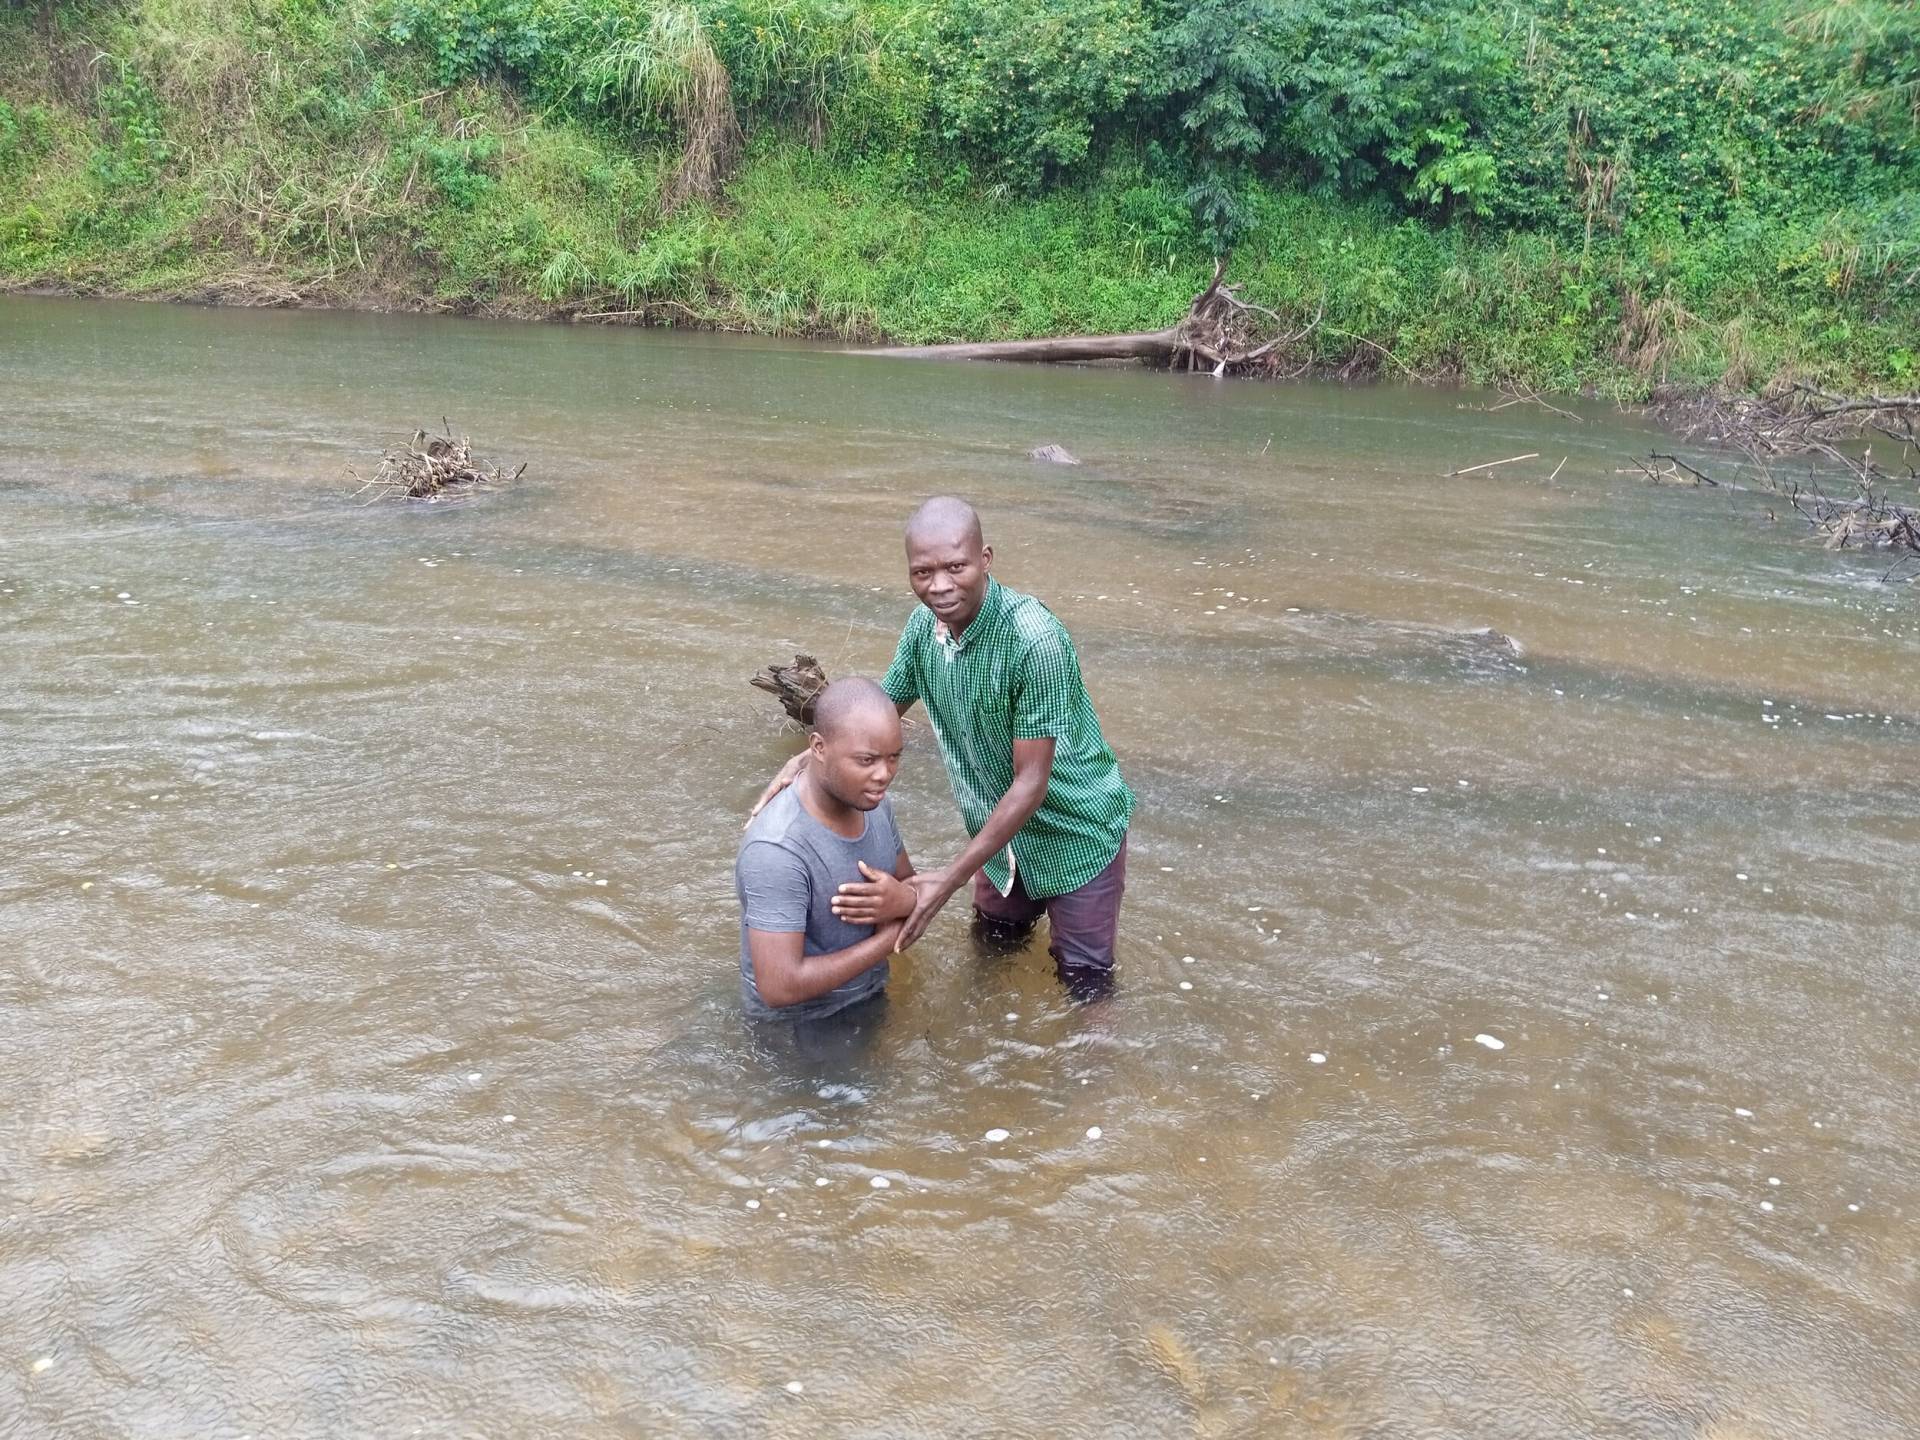 A baptism in Malawi